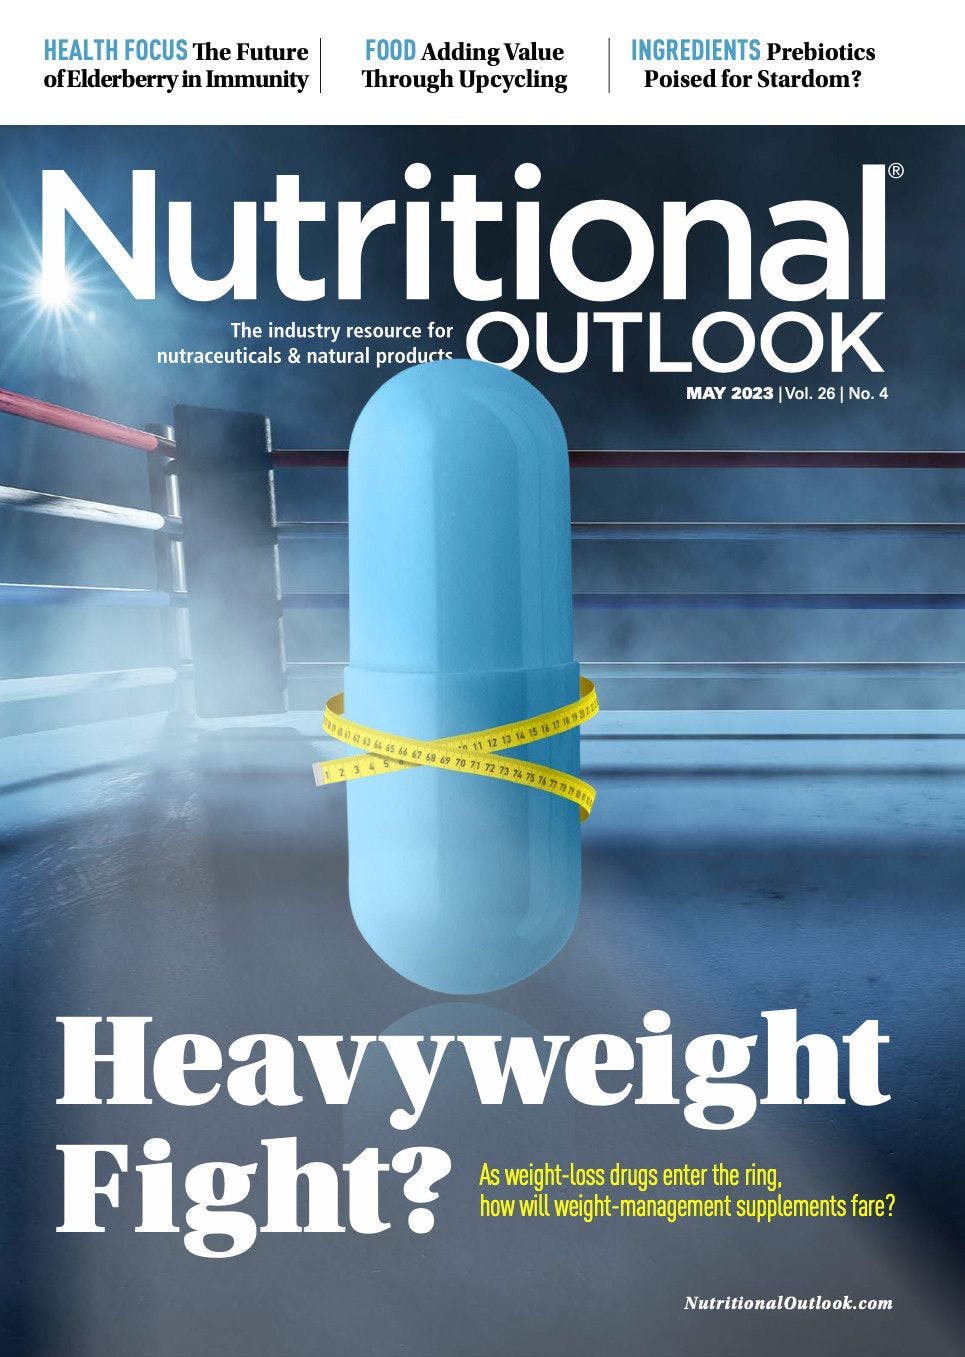 Nutritional Outlook Vol. 26 No. 4